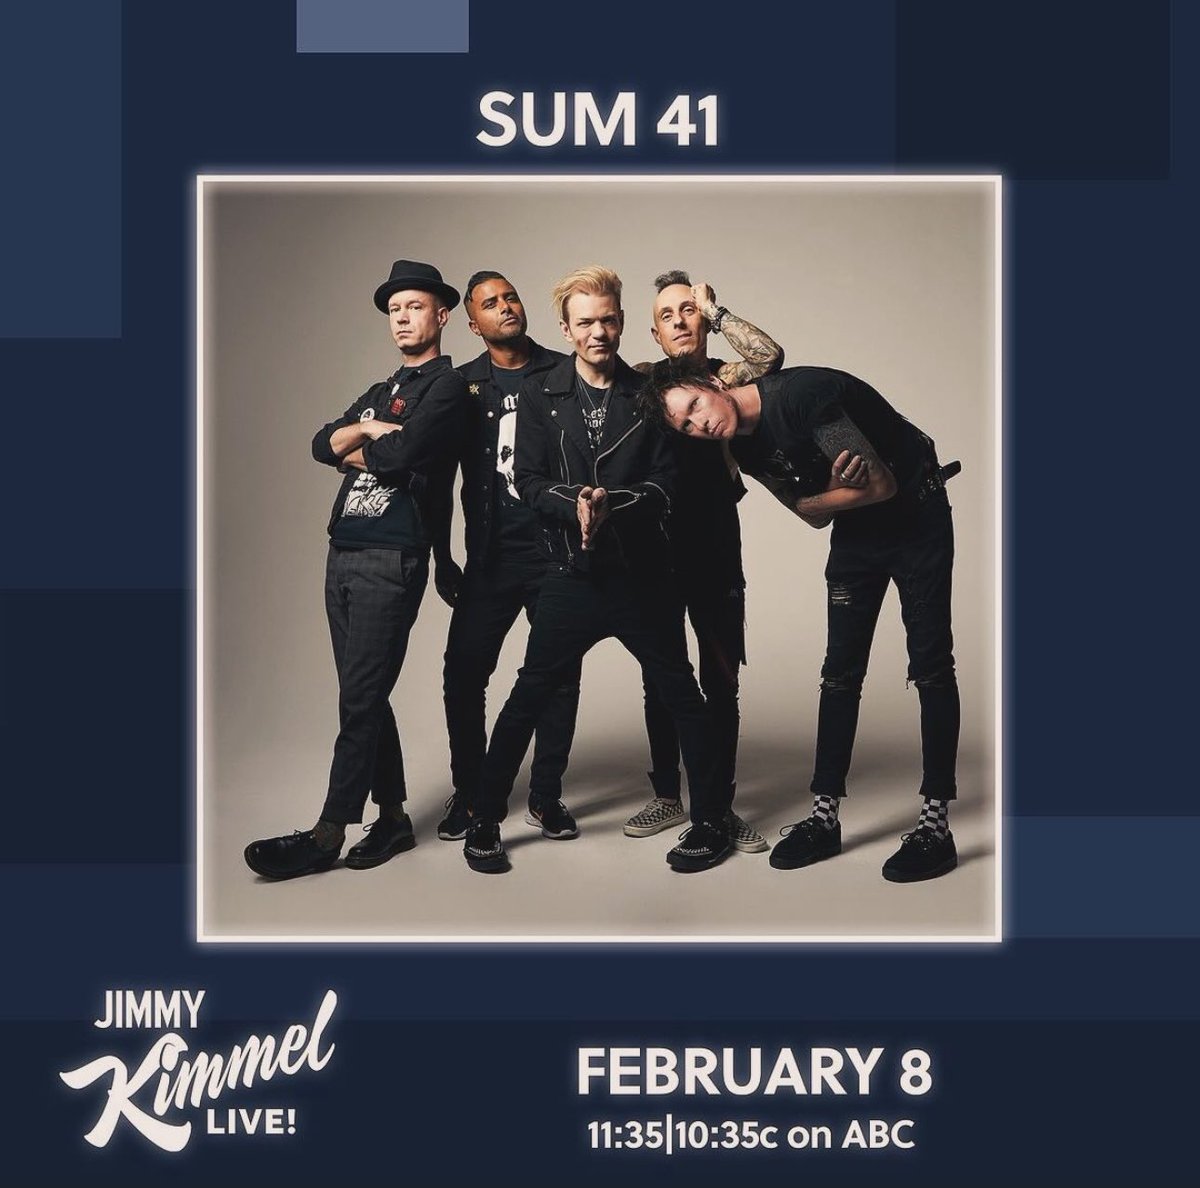 Very stoked to make our return to @JimmyKimmelLive Thursday Feb 8th 11:35/10:35c. Tune in and check it out! @ABCNetwork